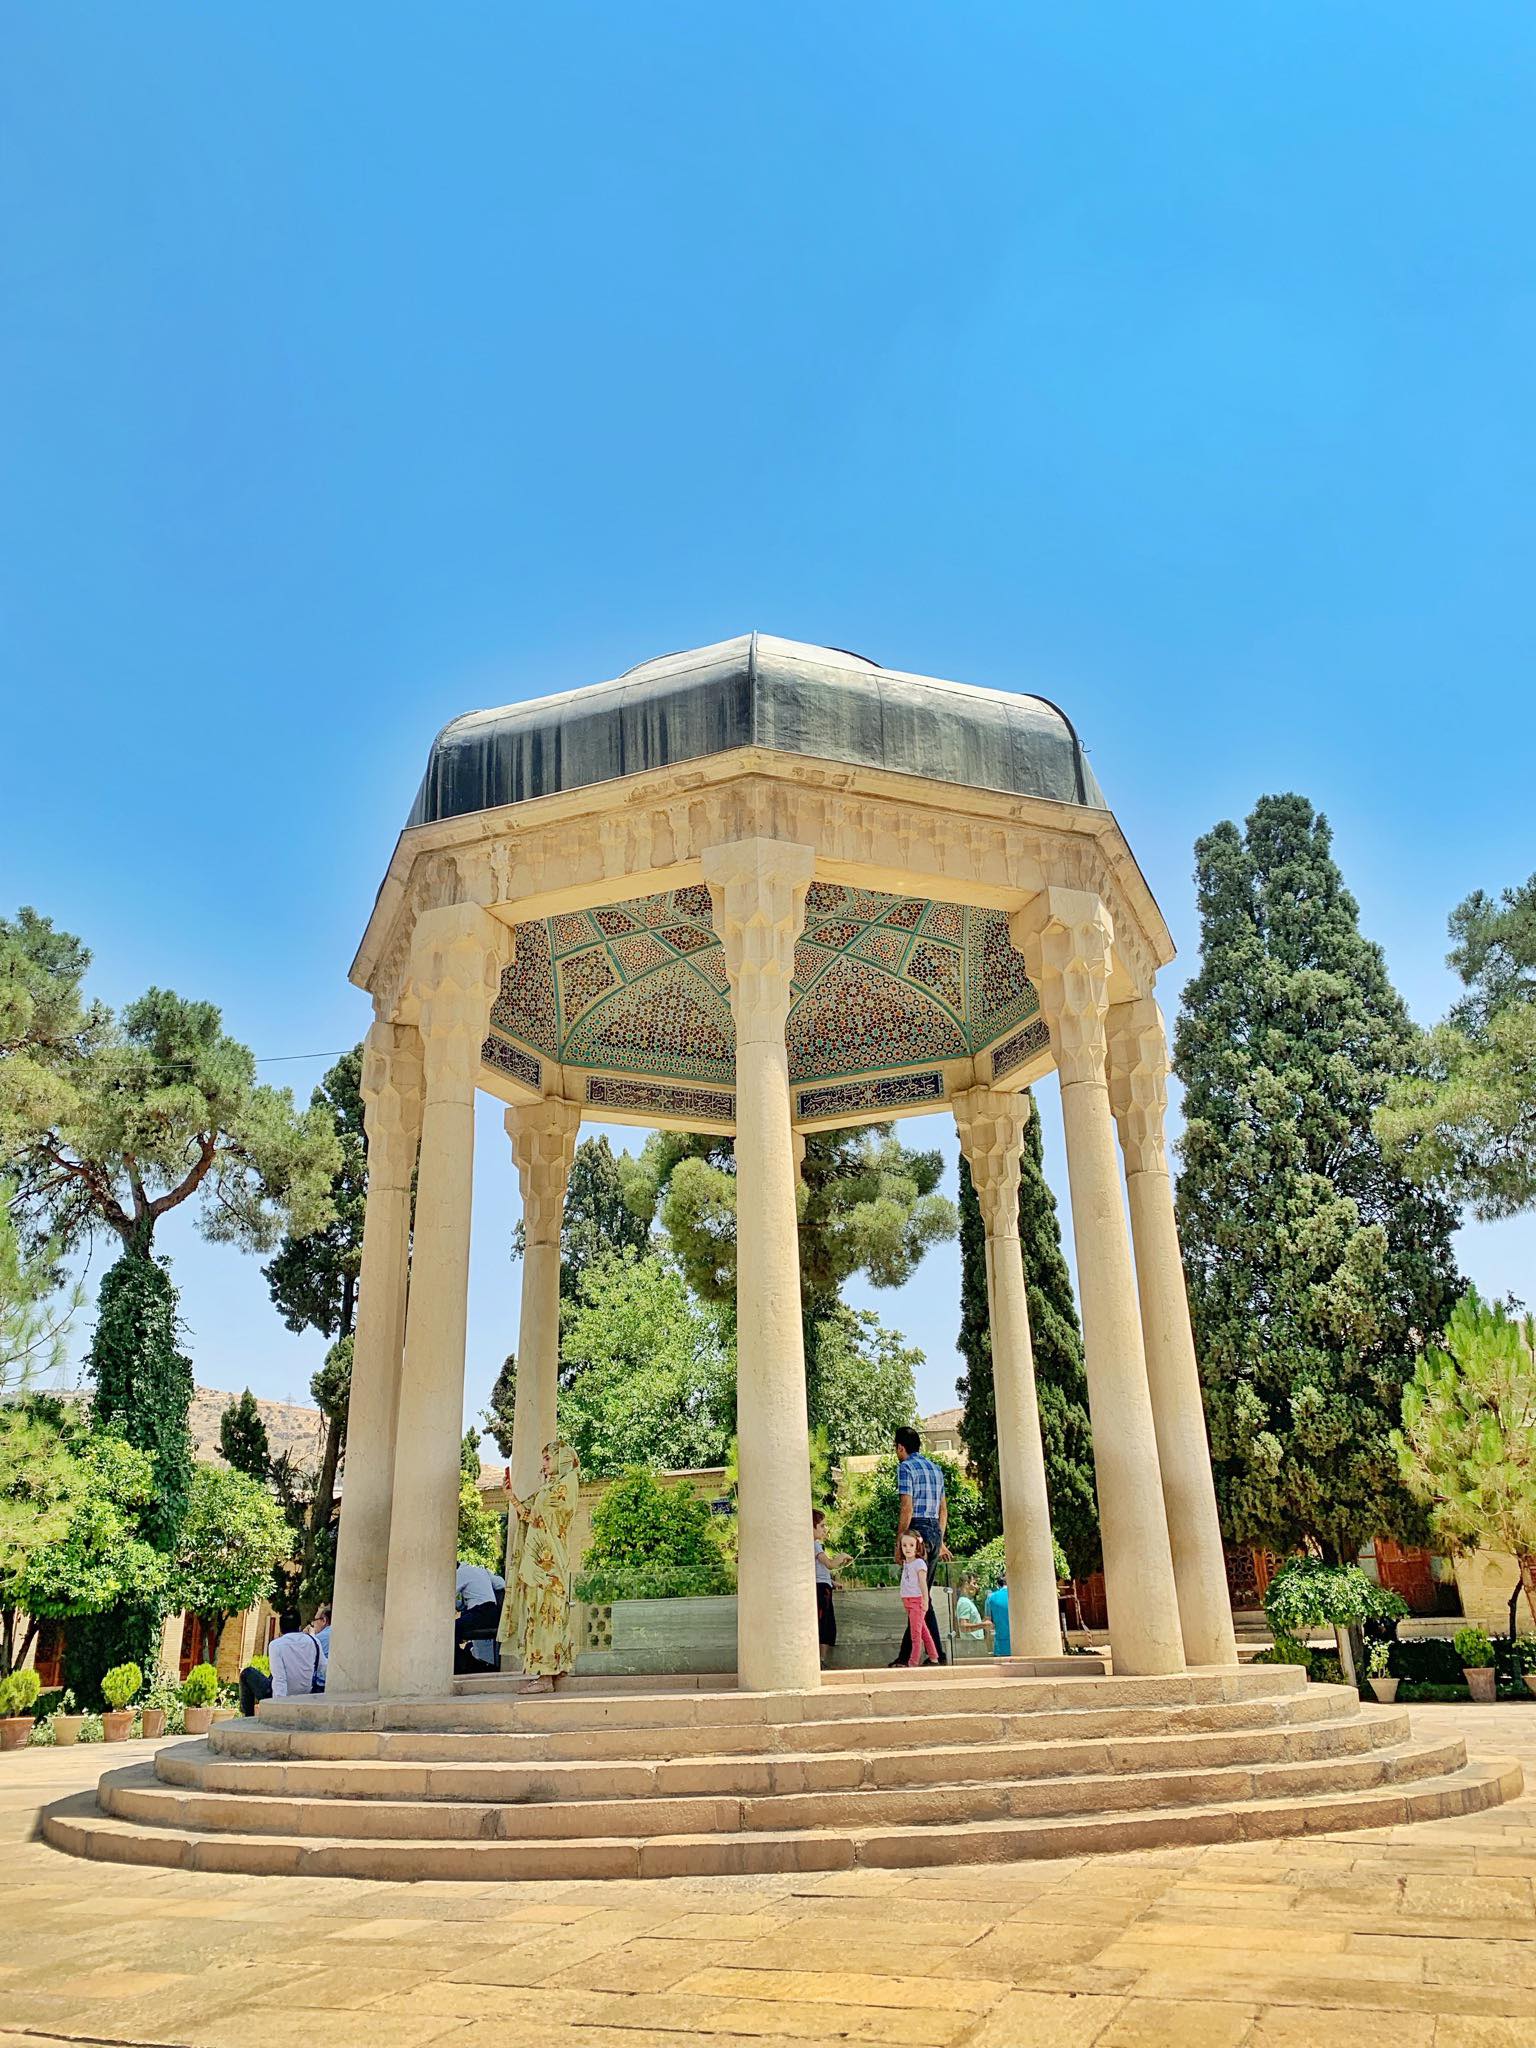 Kach Solo Travels in 2019 Full day tour of Shiraz8.jpg